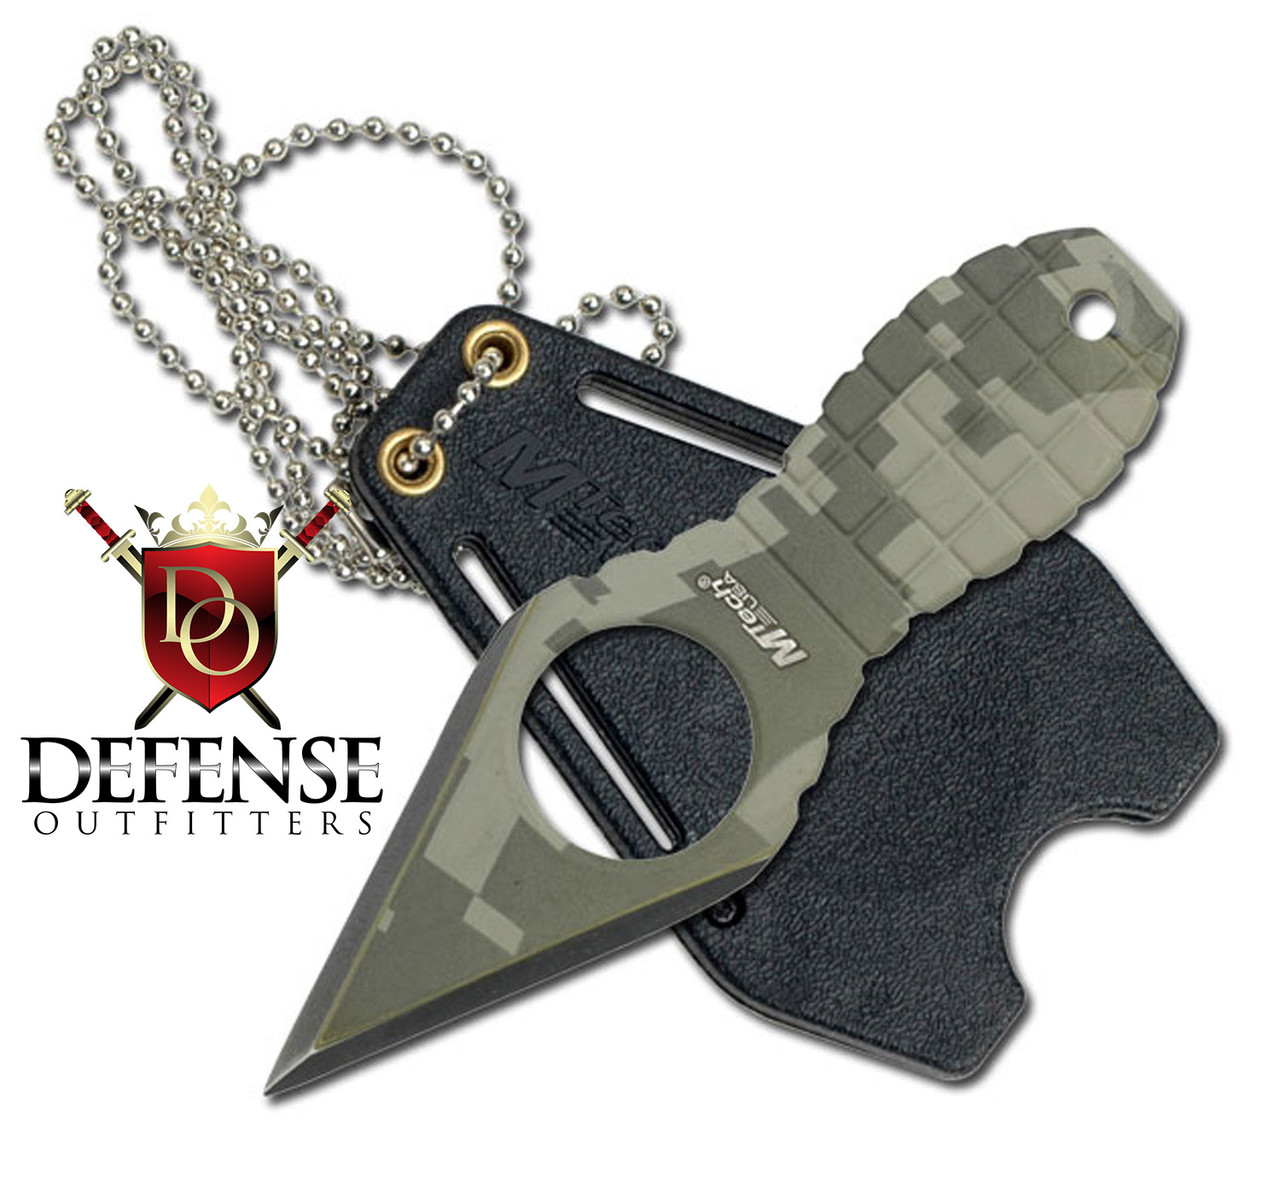 Knives and Cutlery - Sharpening - Page 1 - Defense Outfitters